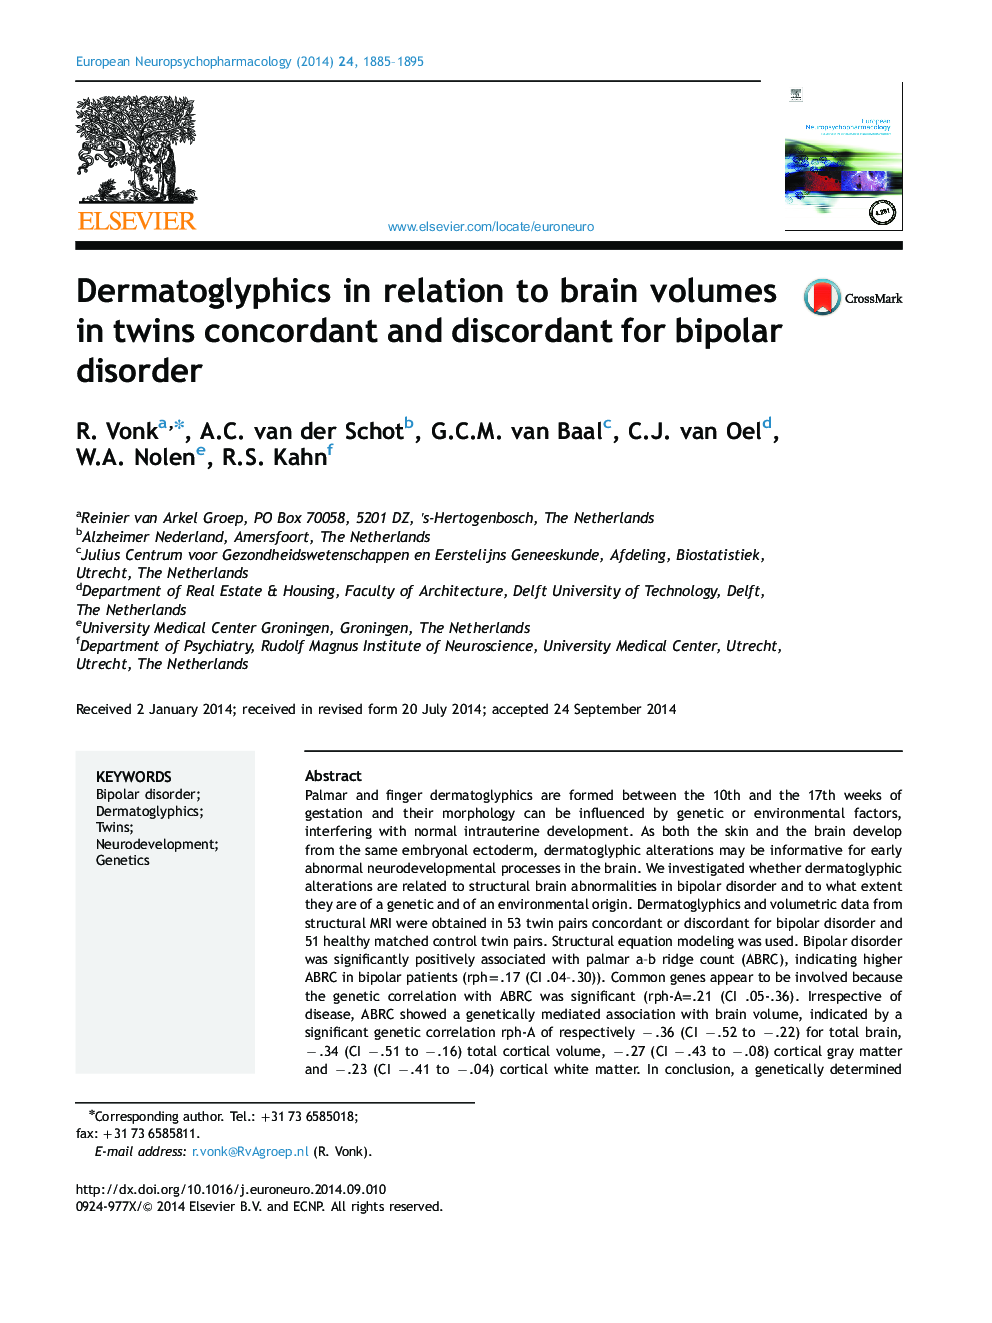 Dermatoglyphics in relation to brain volumes in twins concordant and discordant for bipolar disorder